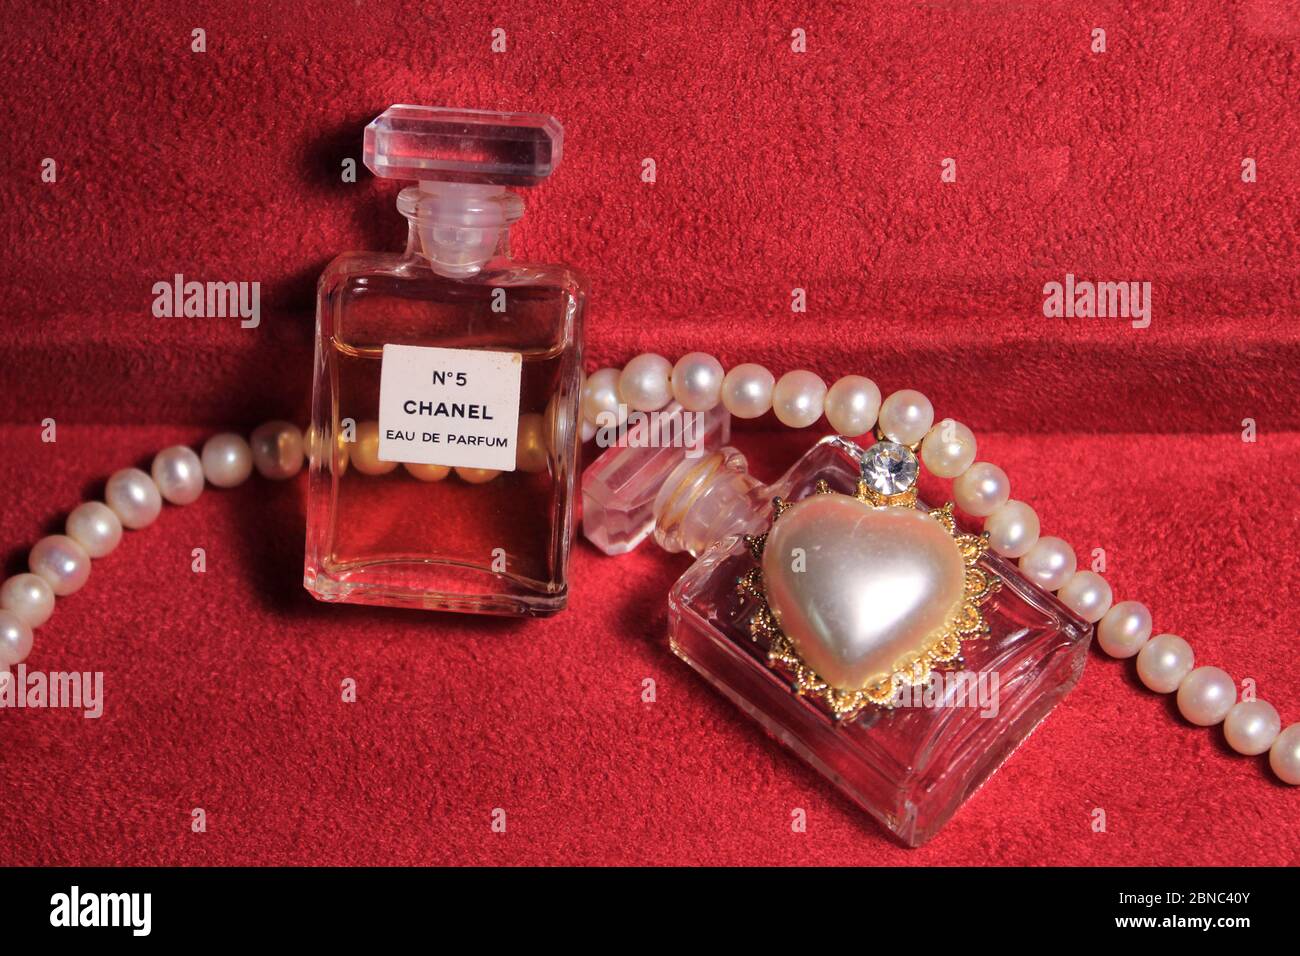 Chanel Perfume Bottles Isolated on Red Background. Bottles with